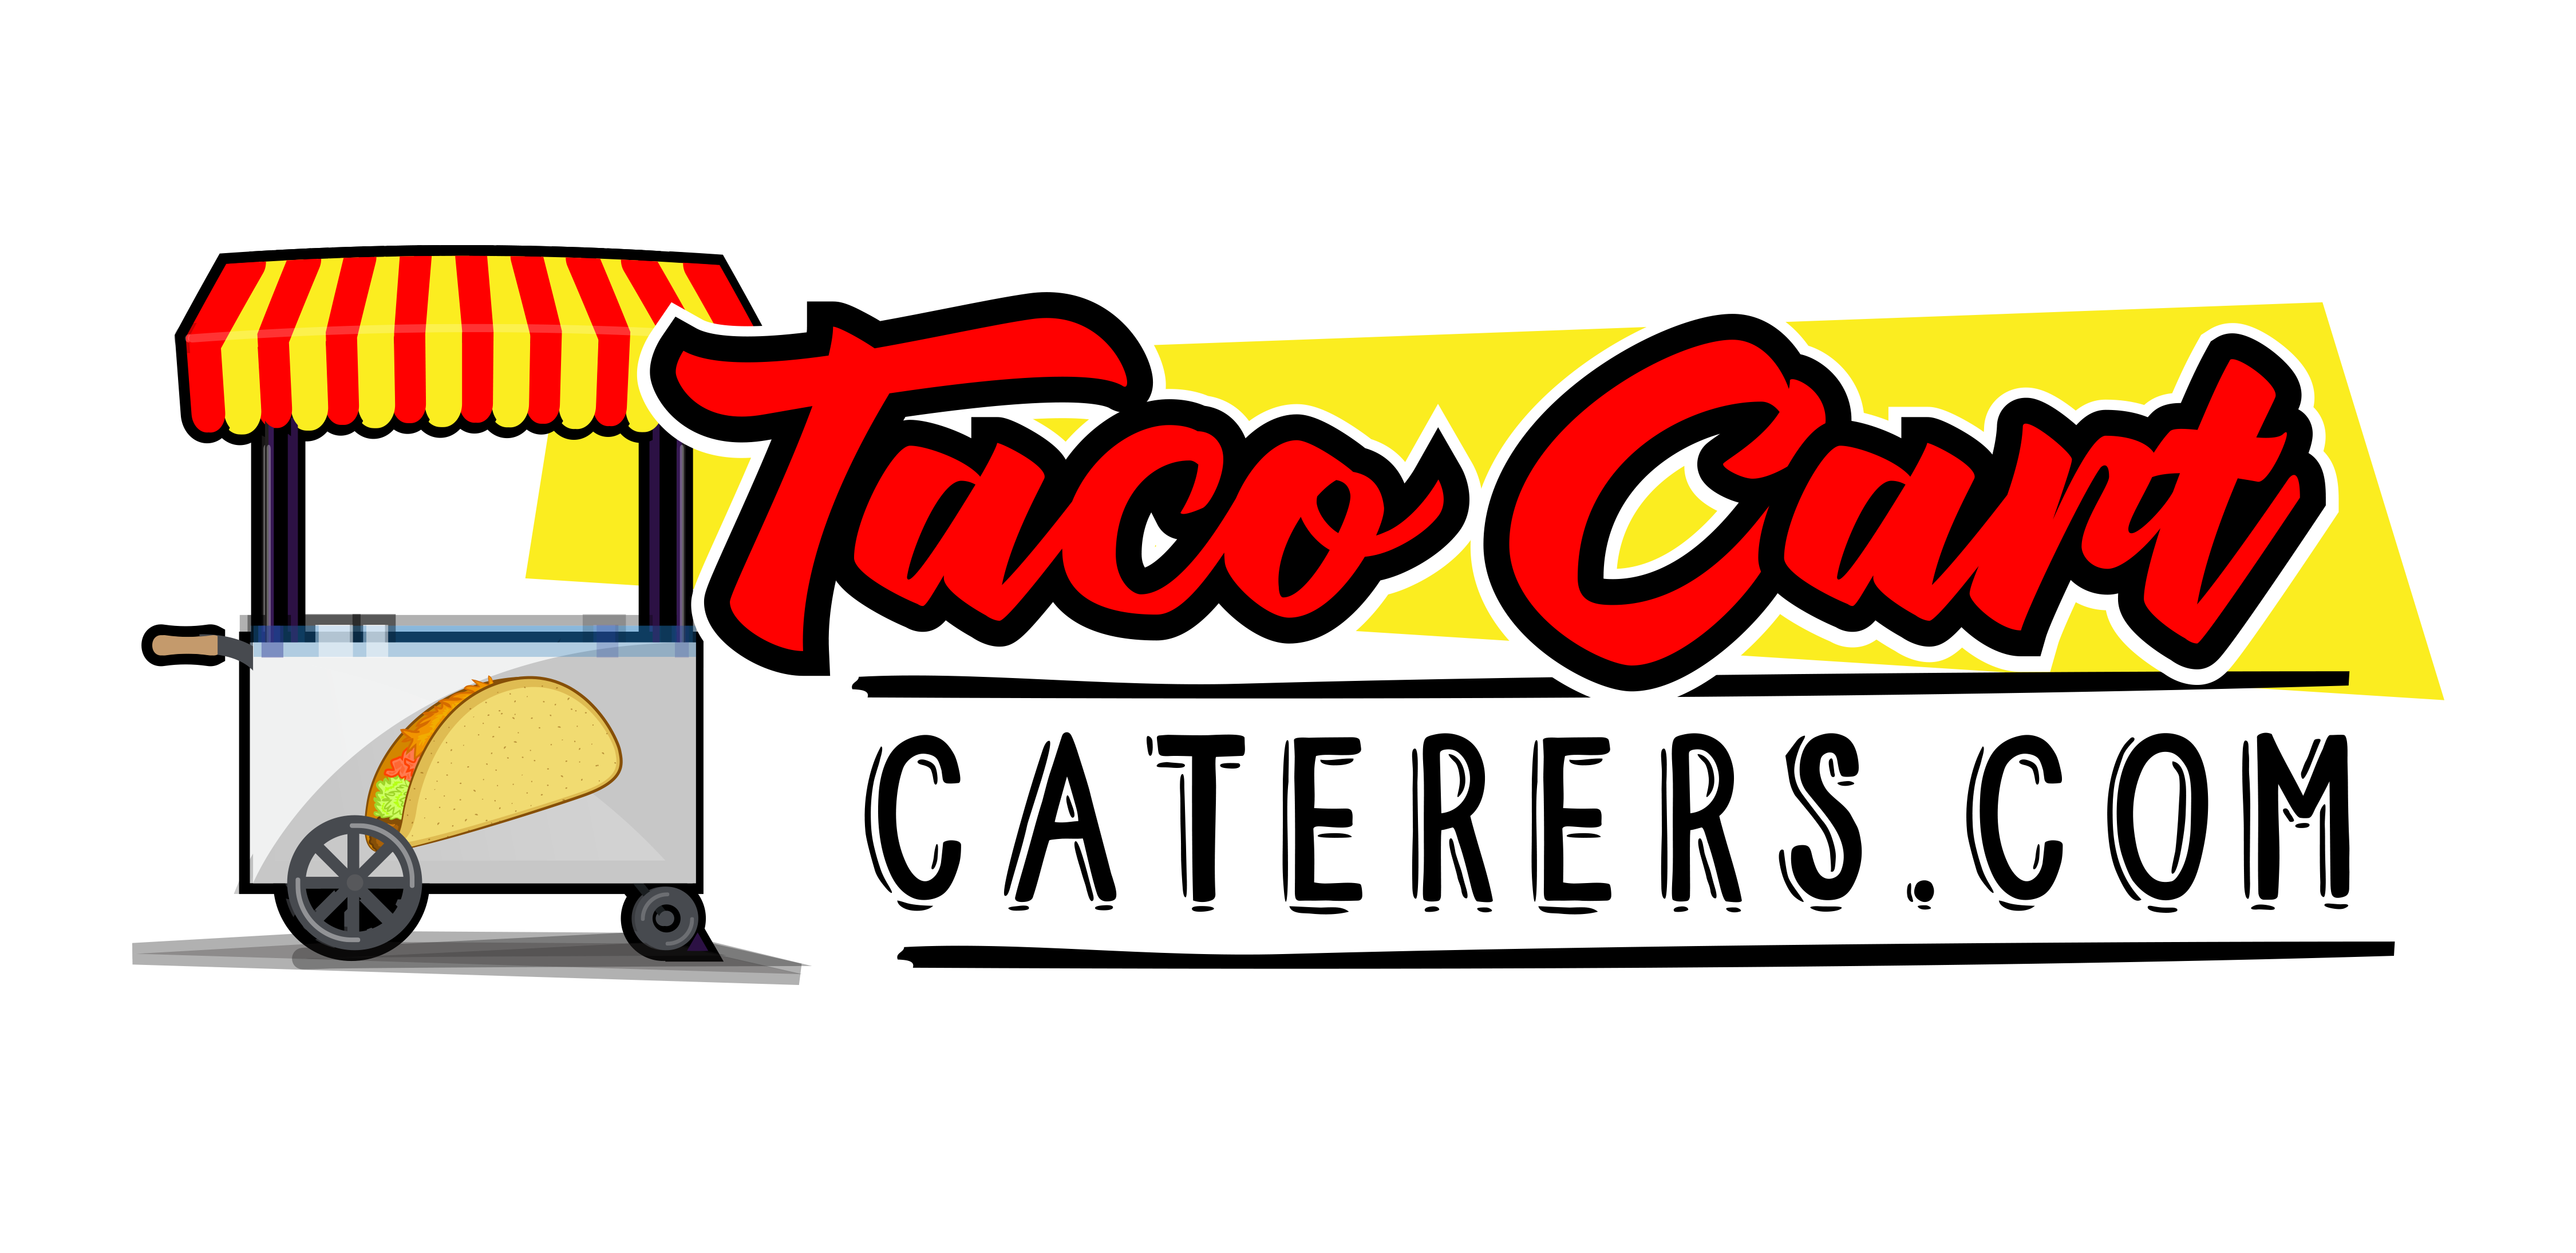 Cart caterers . Tacos clipart taco guy